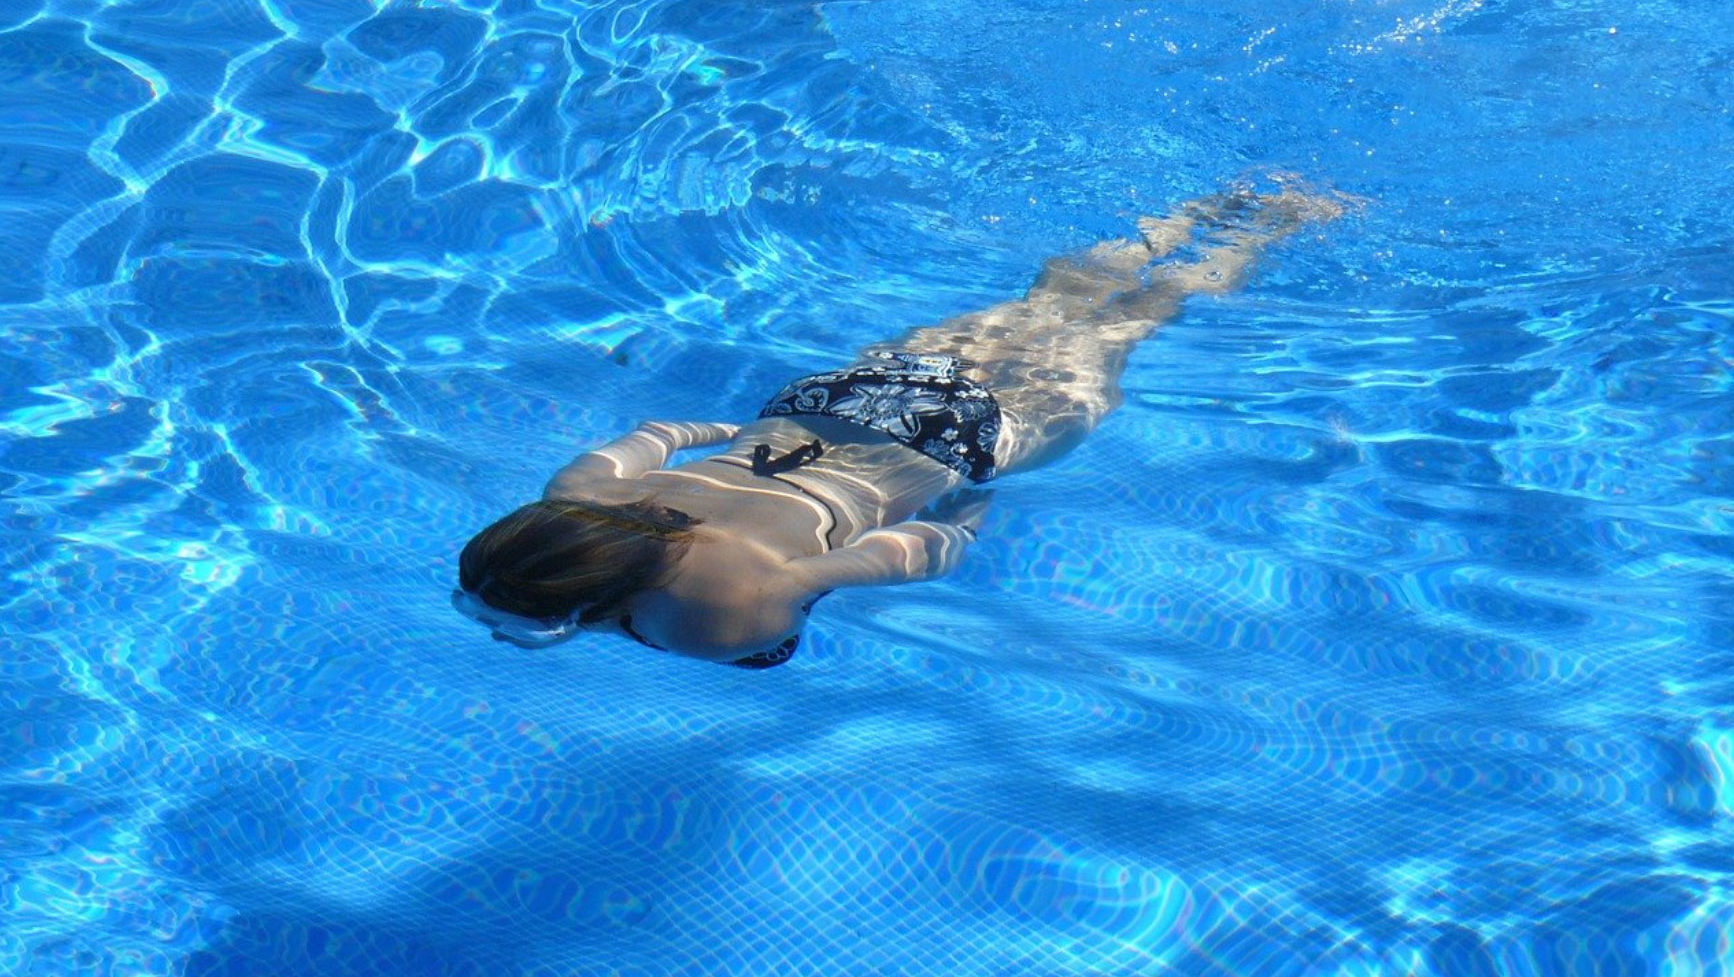 A woman diving into a pool.